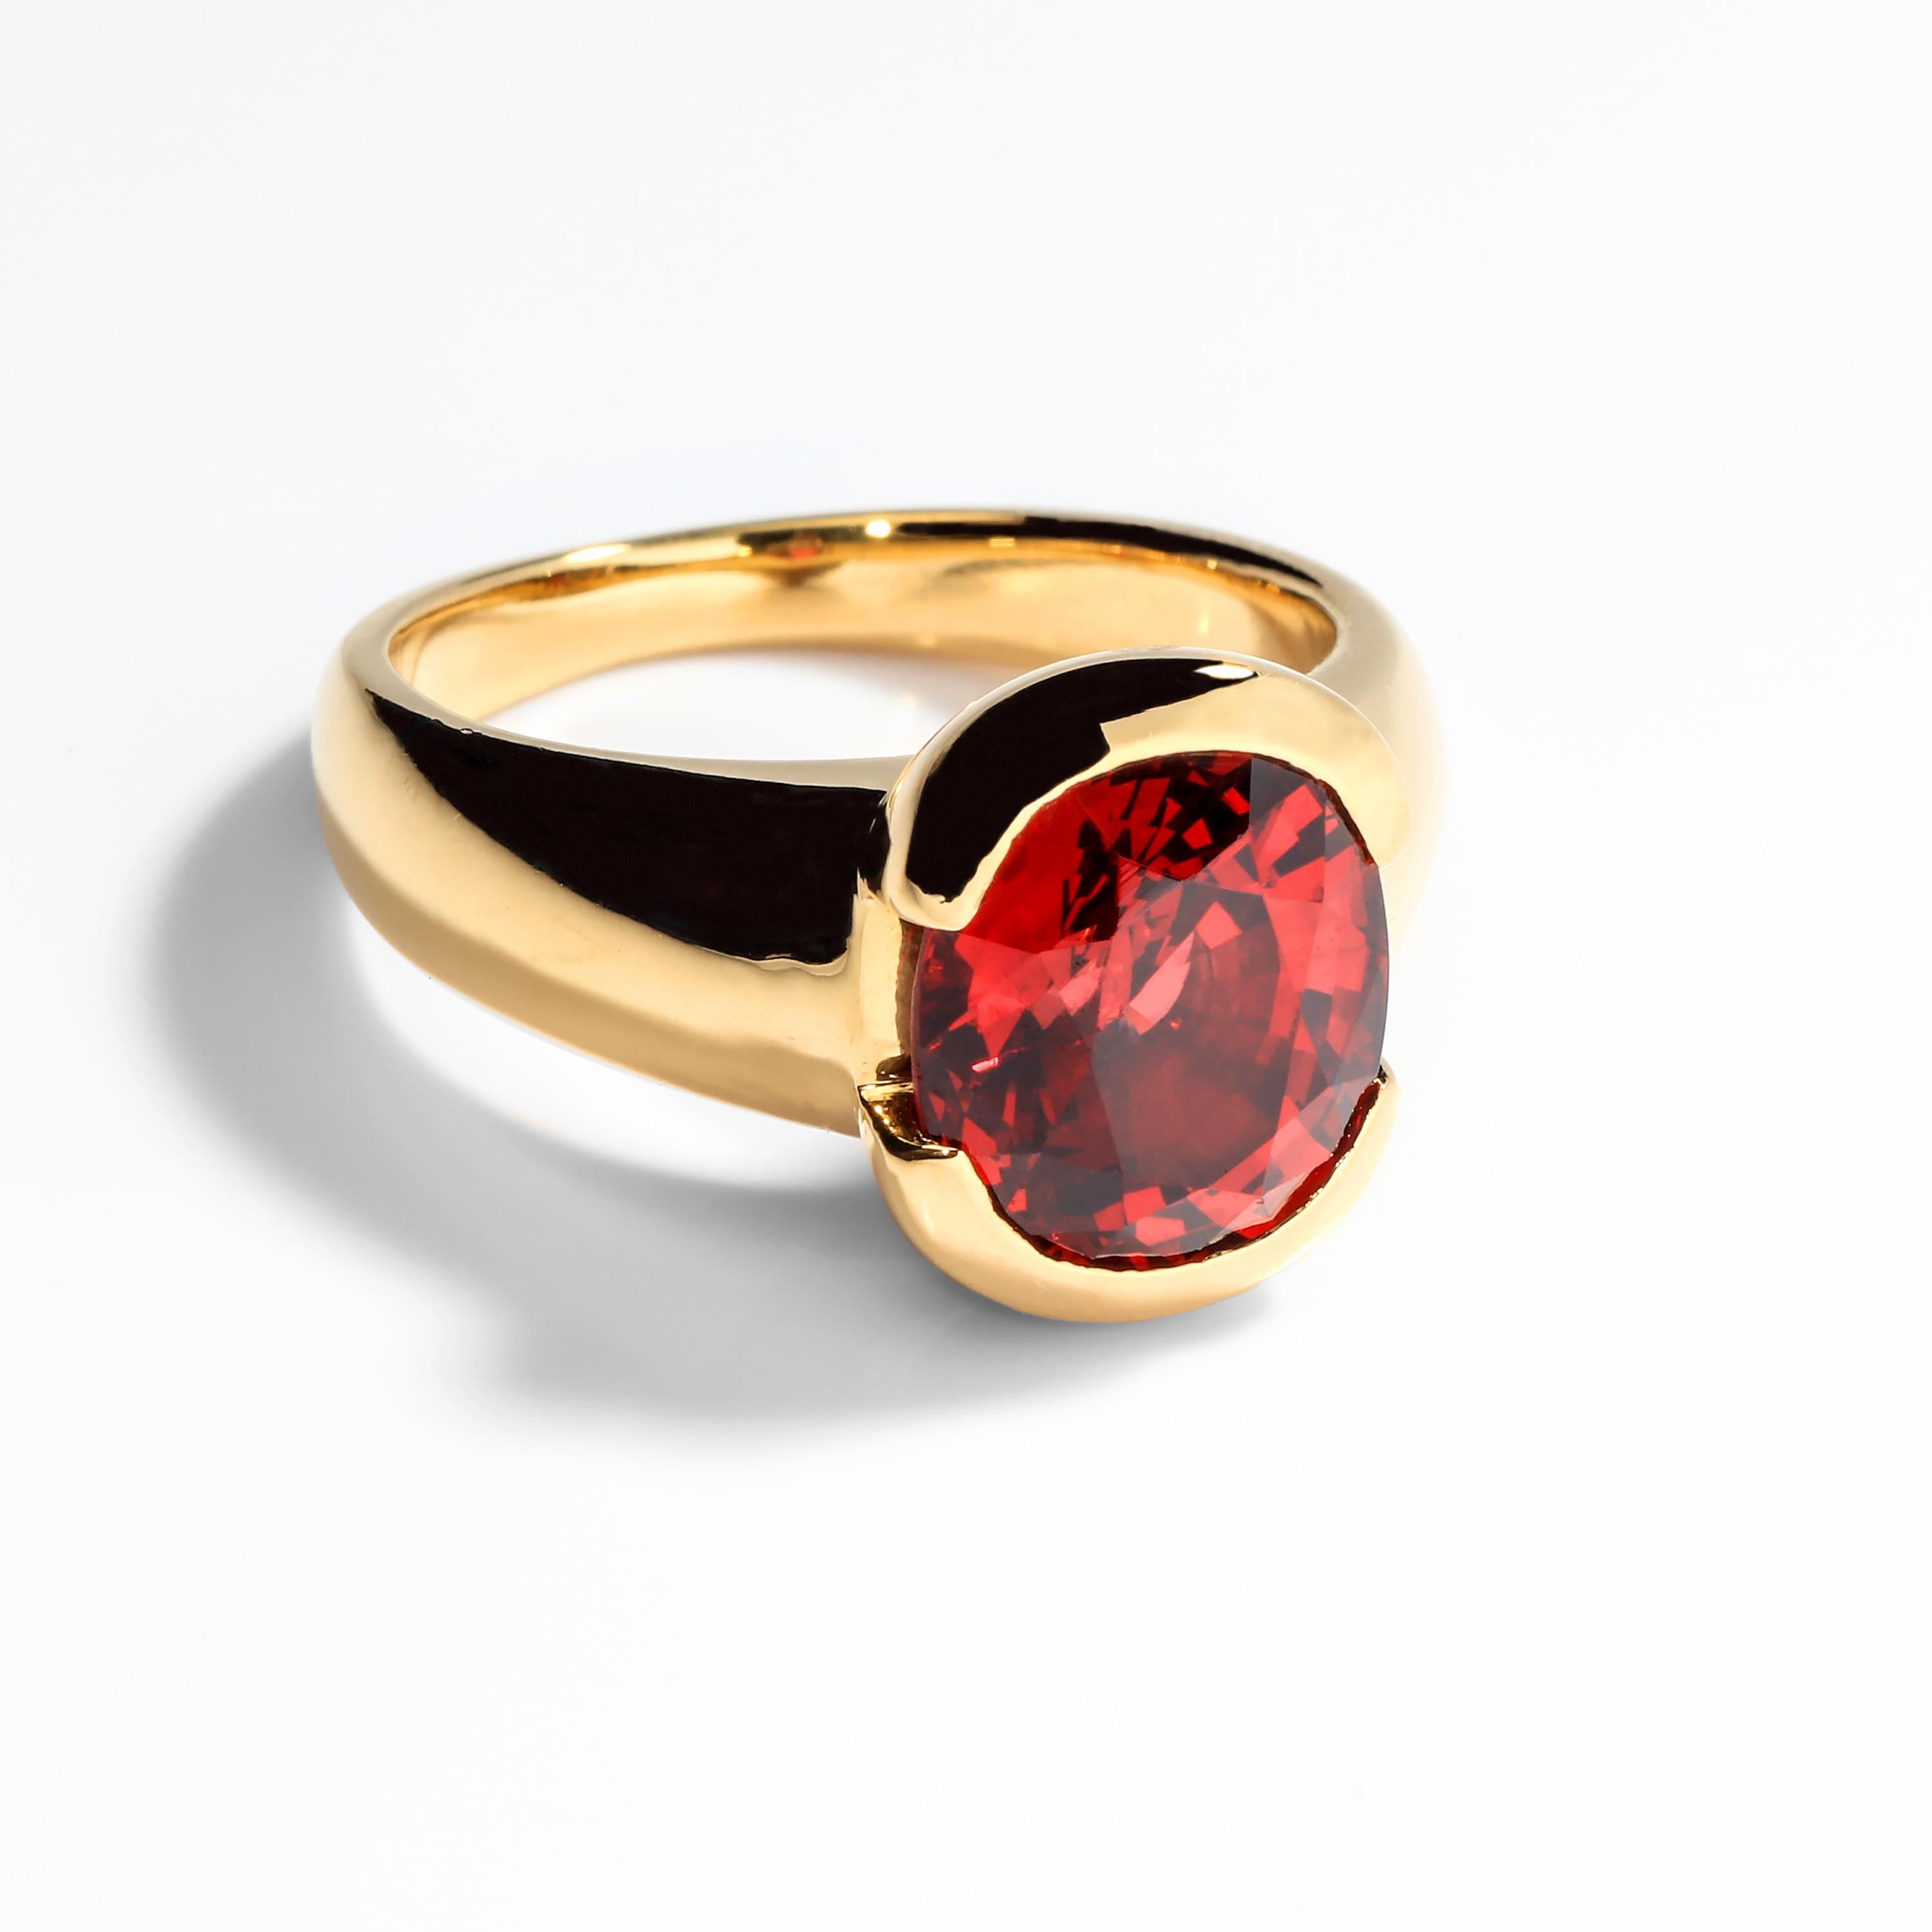 This 10mm x 9mm 4-carat oval-cut spinel is the pleasing color we always seek in a ruby but rarely seem to find —most are either too pink, too purple, too dark or too small.  This large and bright stoplight of a gem is situated within a half-bezel